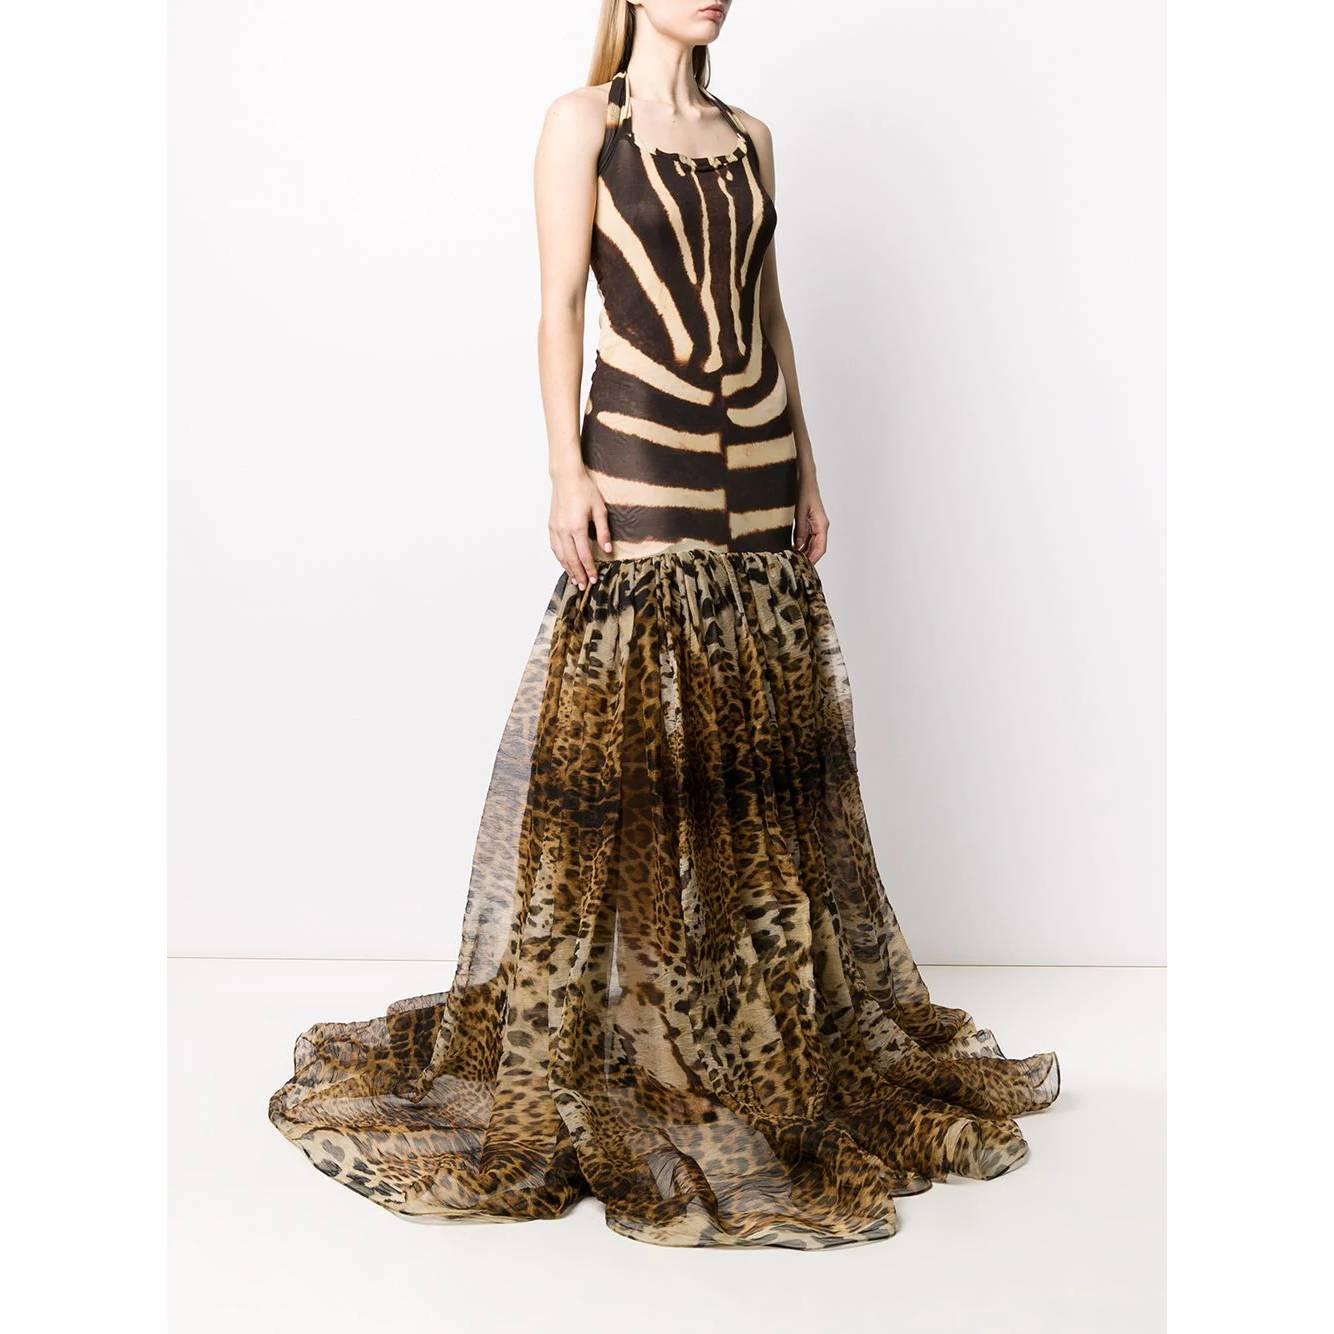 A.N.G.E.L.O. VINTAGE – Italy

Gianfranco Ferré beige and brown animal print stretch fabric evening dress. Mermaid design with open back and tulle appliqué. Back zip closure.

Years: 90s 

Made in Italy

Size: 40 IT 

Flat measurements 

Height: 200